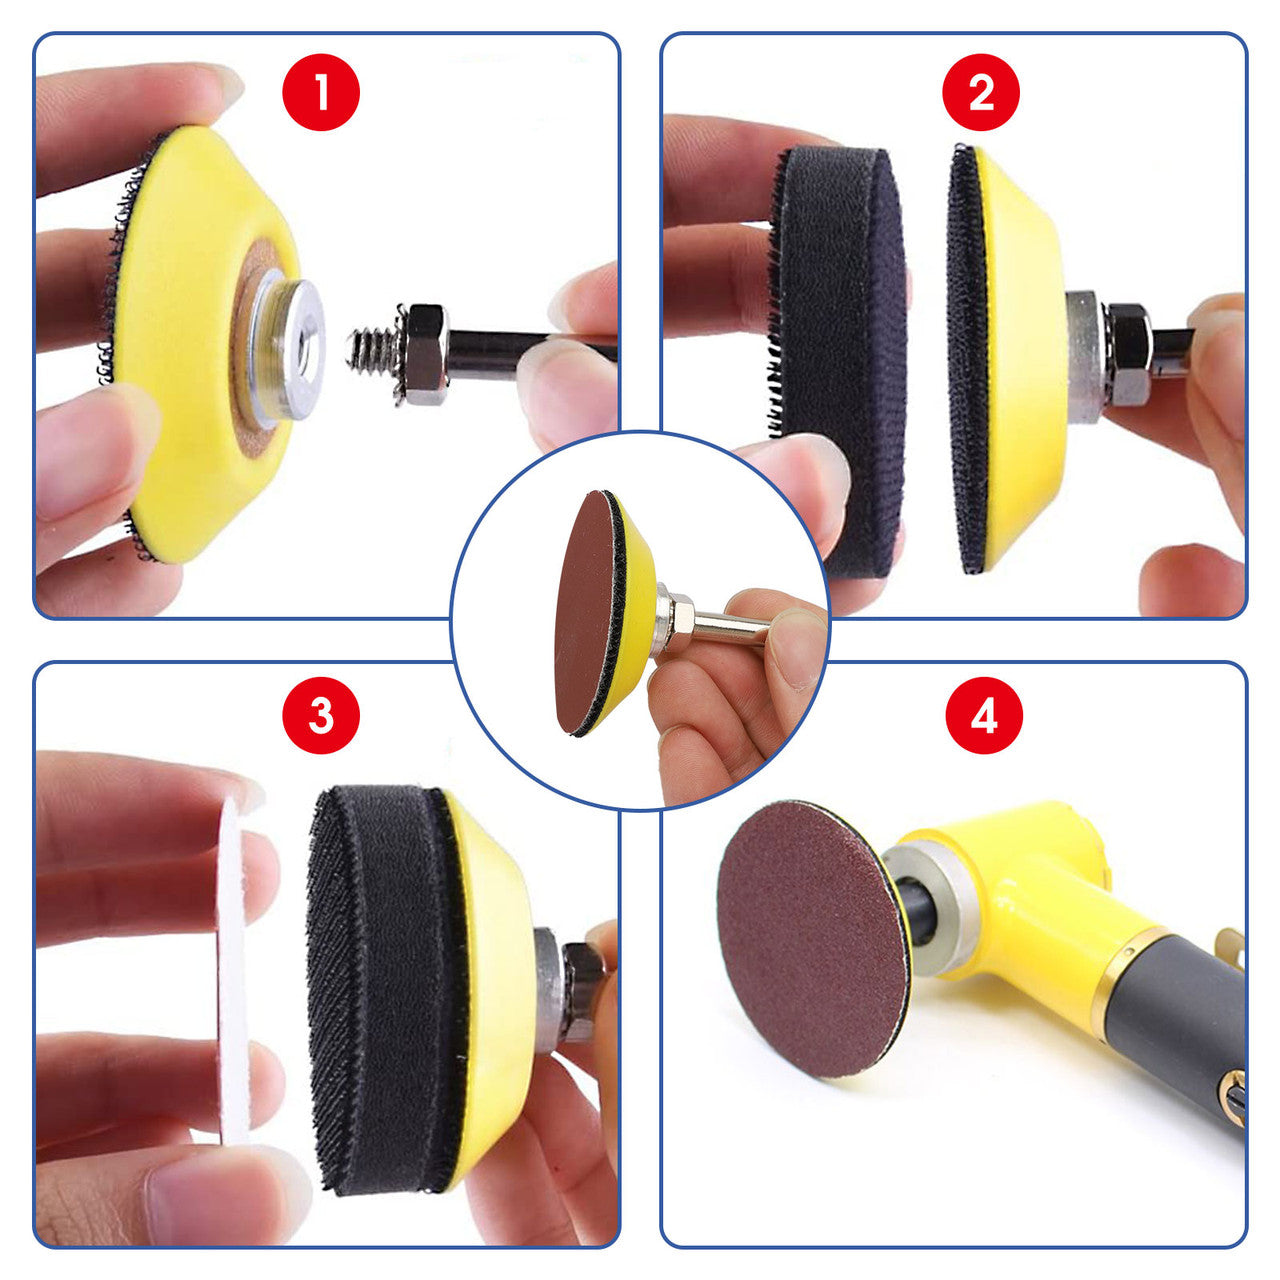 2 Inches Sanding Discs Pad Kit for Drill Sander, Drill Sanding Attachment Sandpapers with 1pc 1/4鈥欌€?Shank Backing Pad and 1pc Soft Foam Buffering Pad, 100pcs